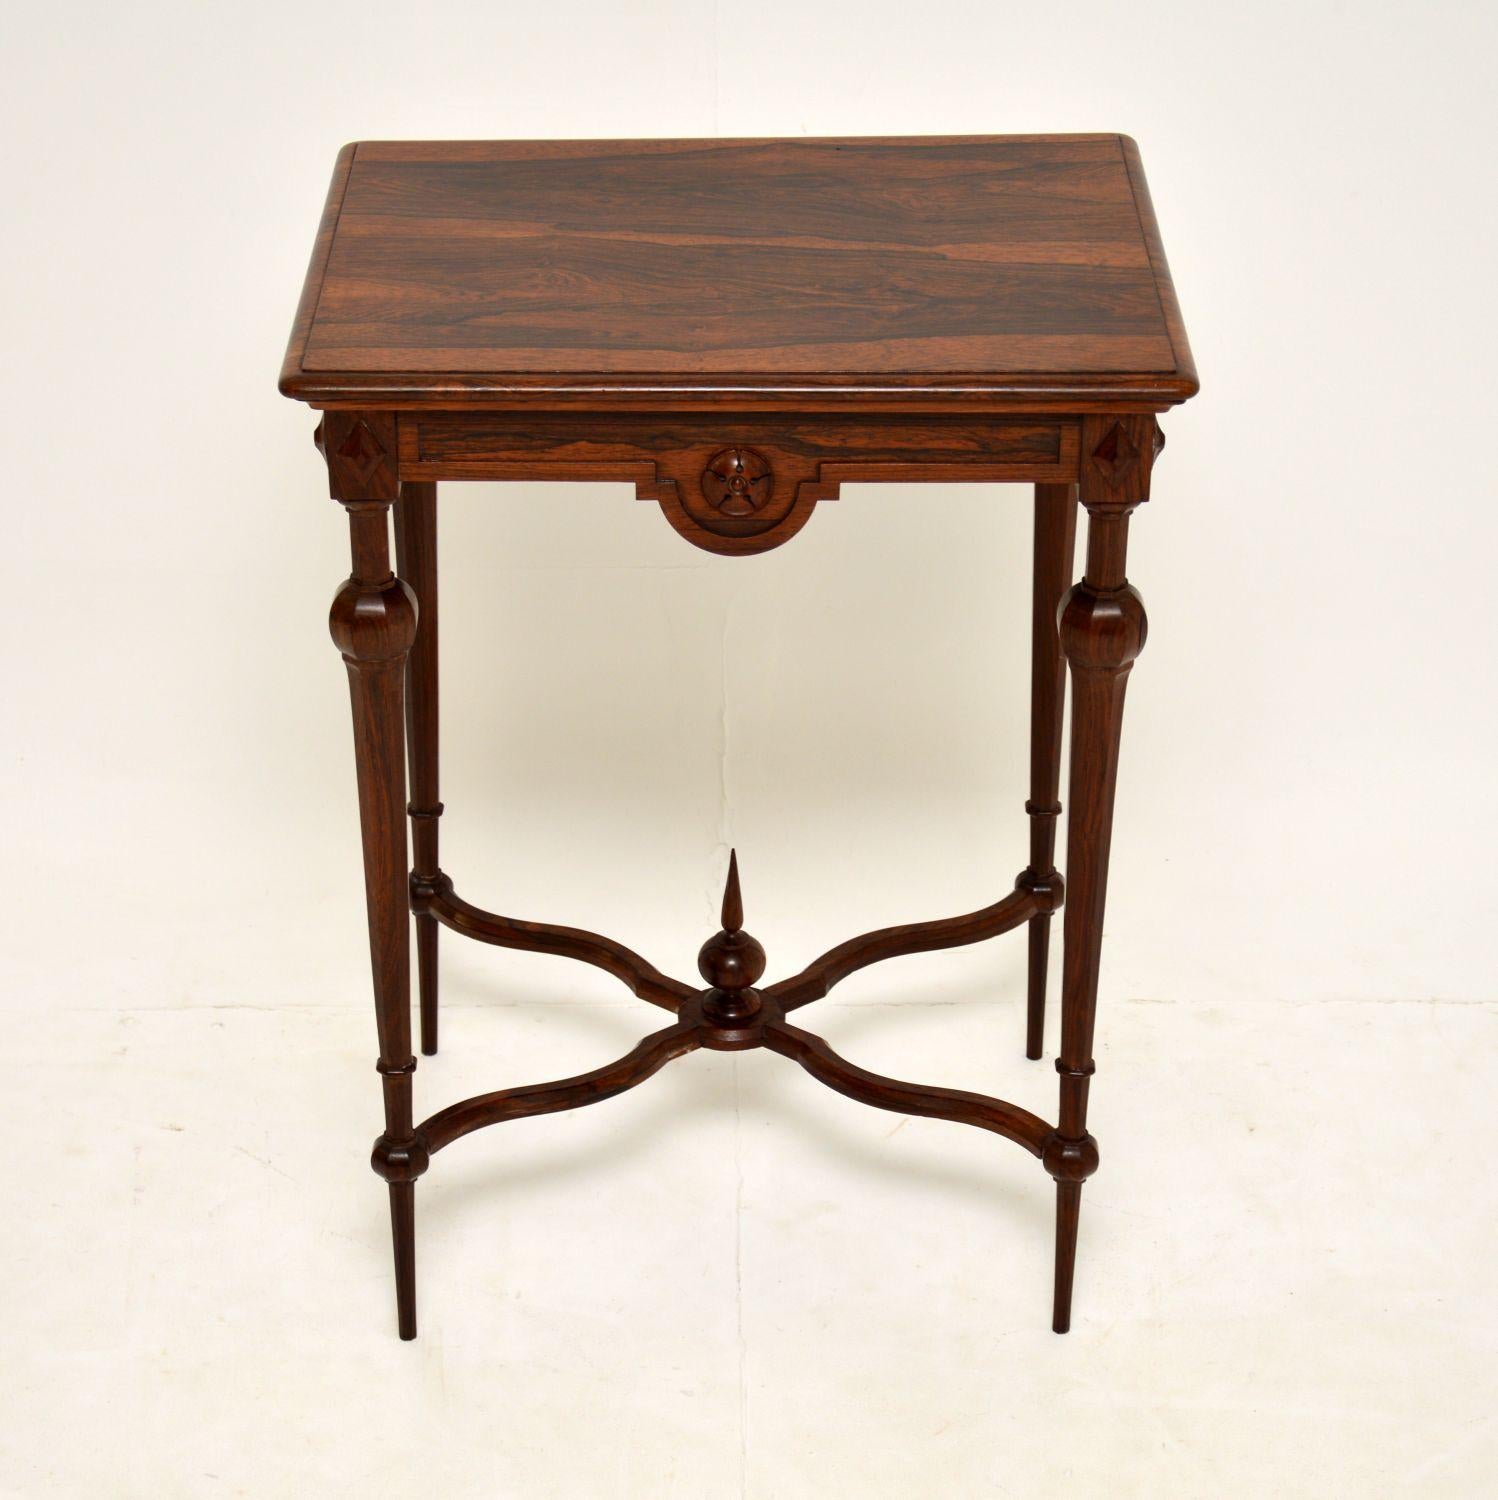 A lovely antique William IV side table, beautifully made from wood. This dates from around the 1830-1840 period.

It is of extremely fine quality, the frame is beautifully carved from solid wood and has an extremely elegant design. This has a